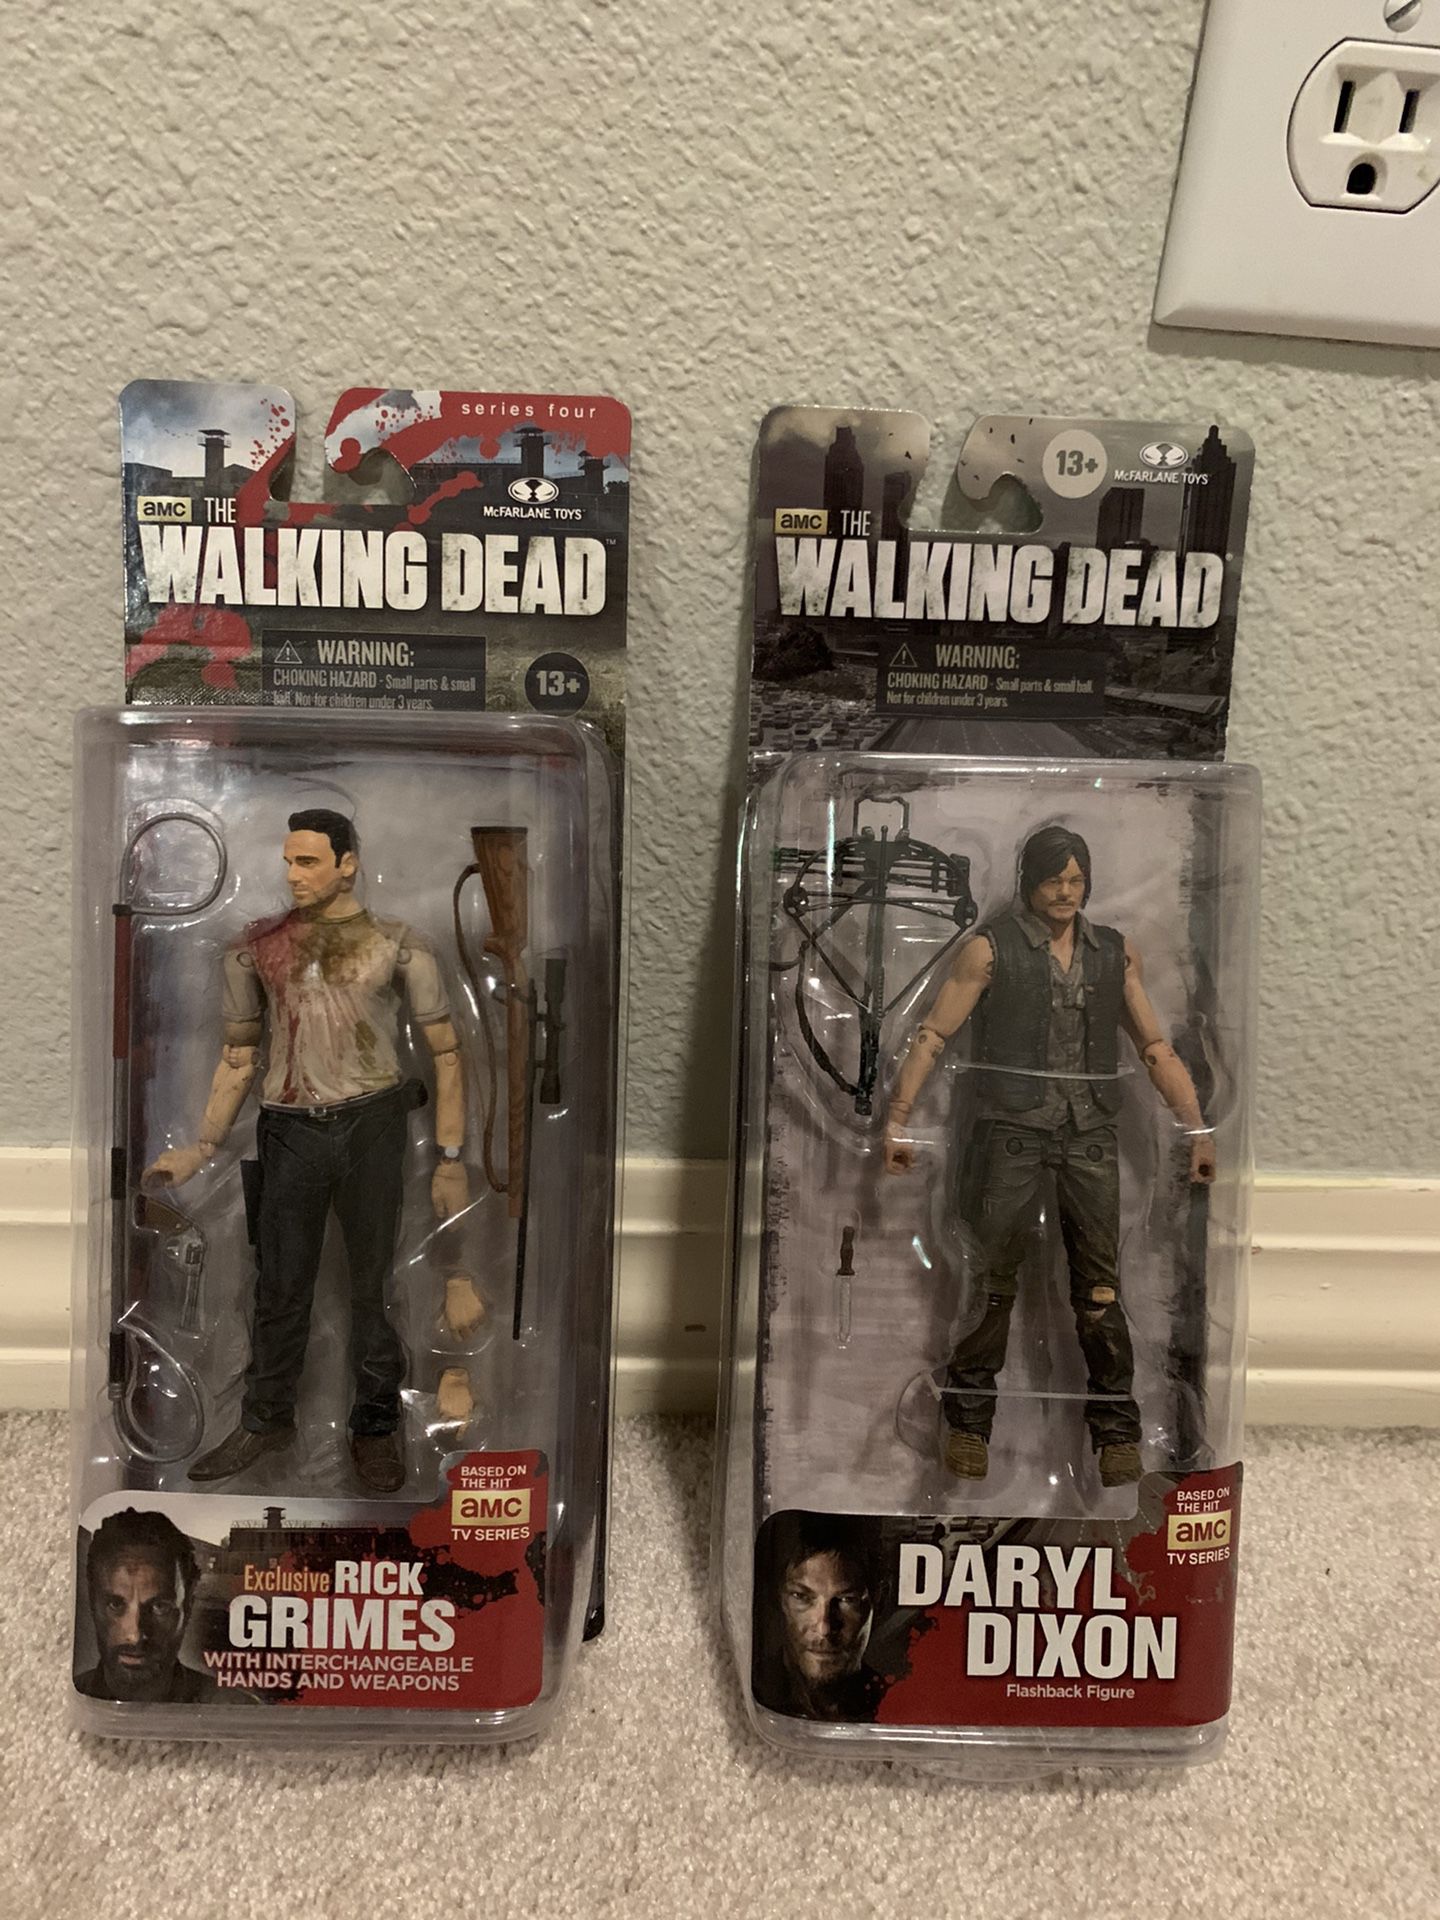 Rick Grimes and Daryl Dixon from The Walking Dead